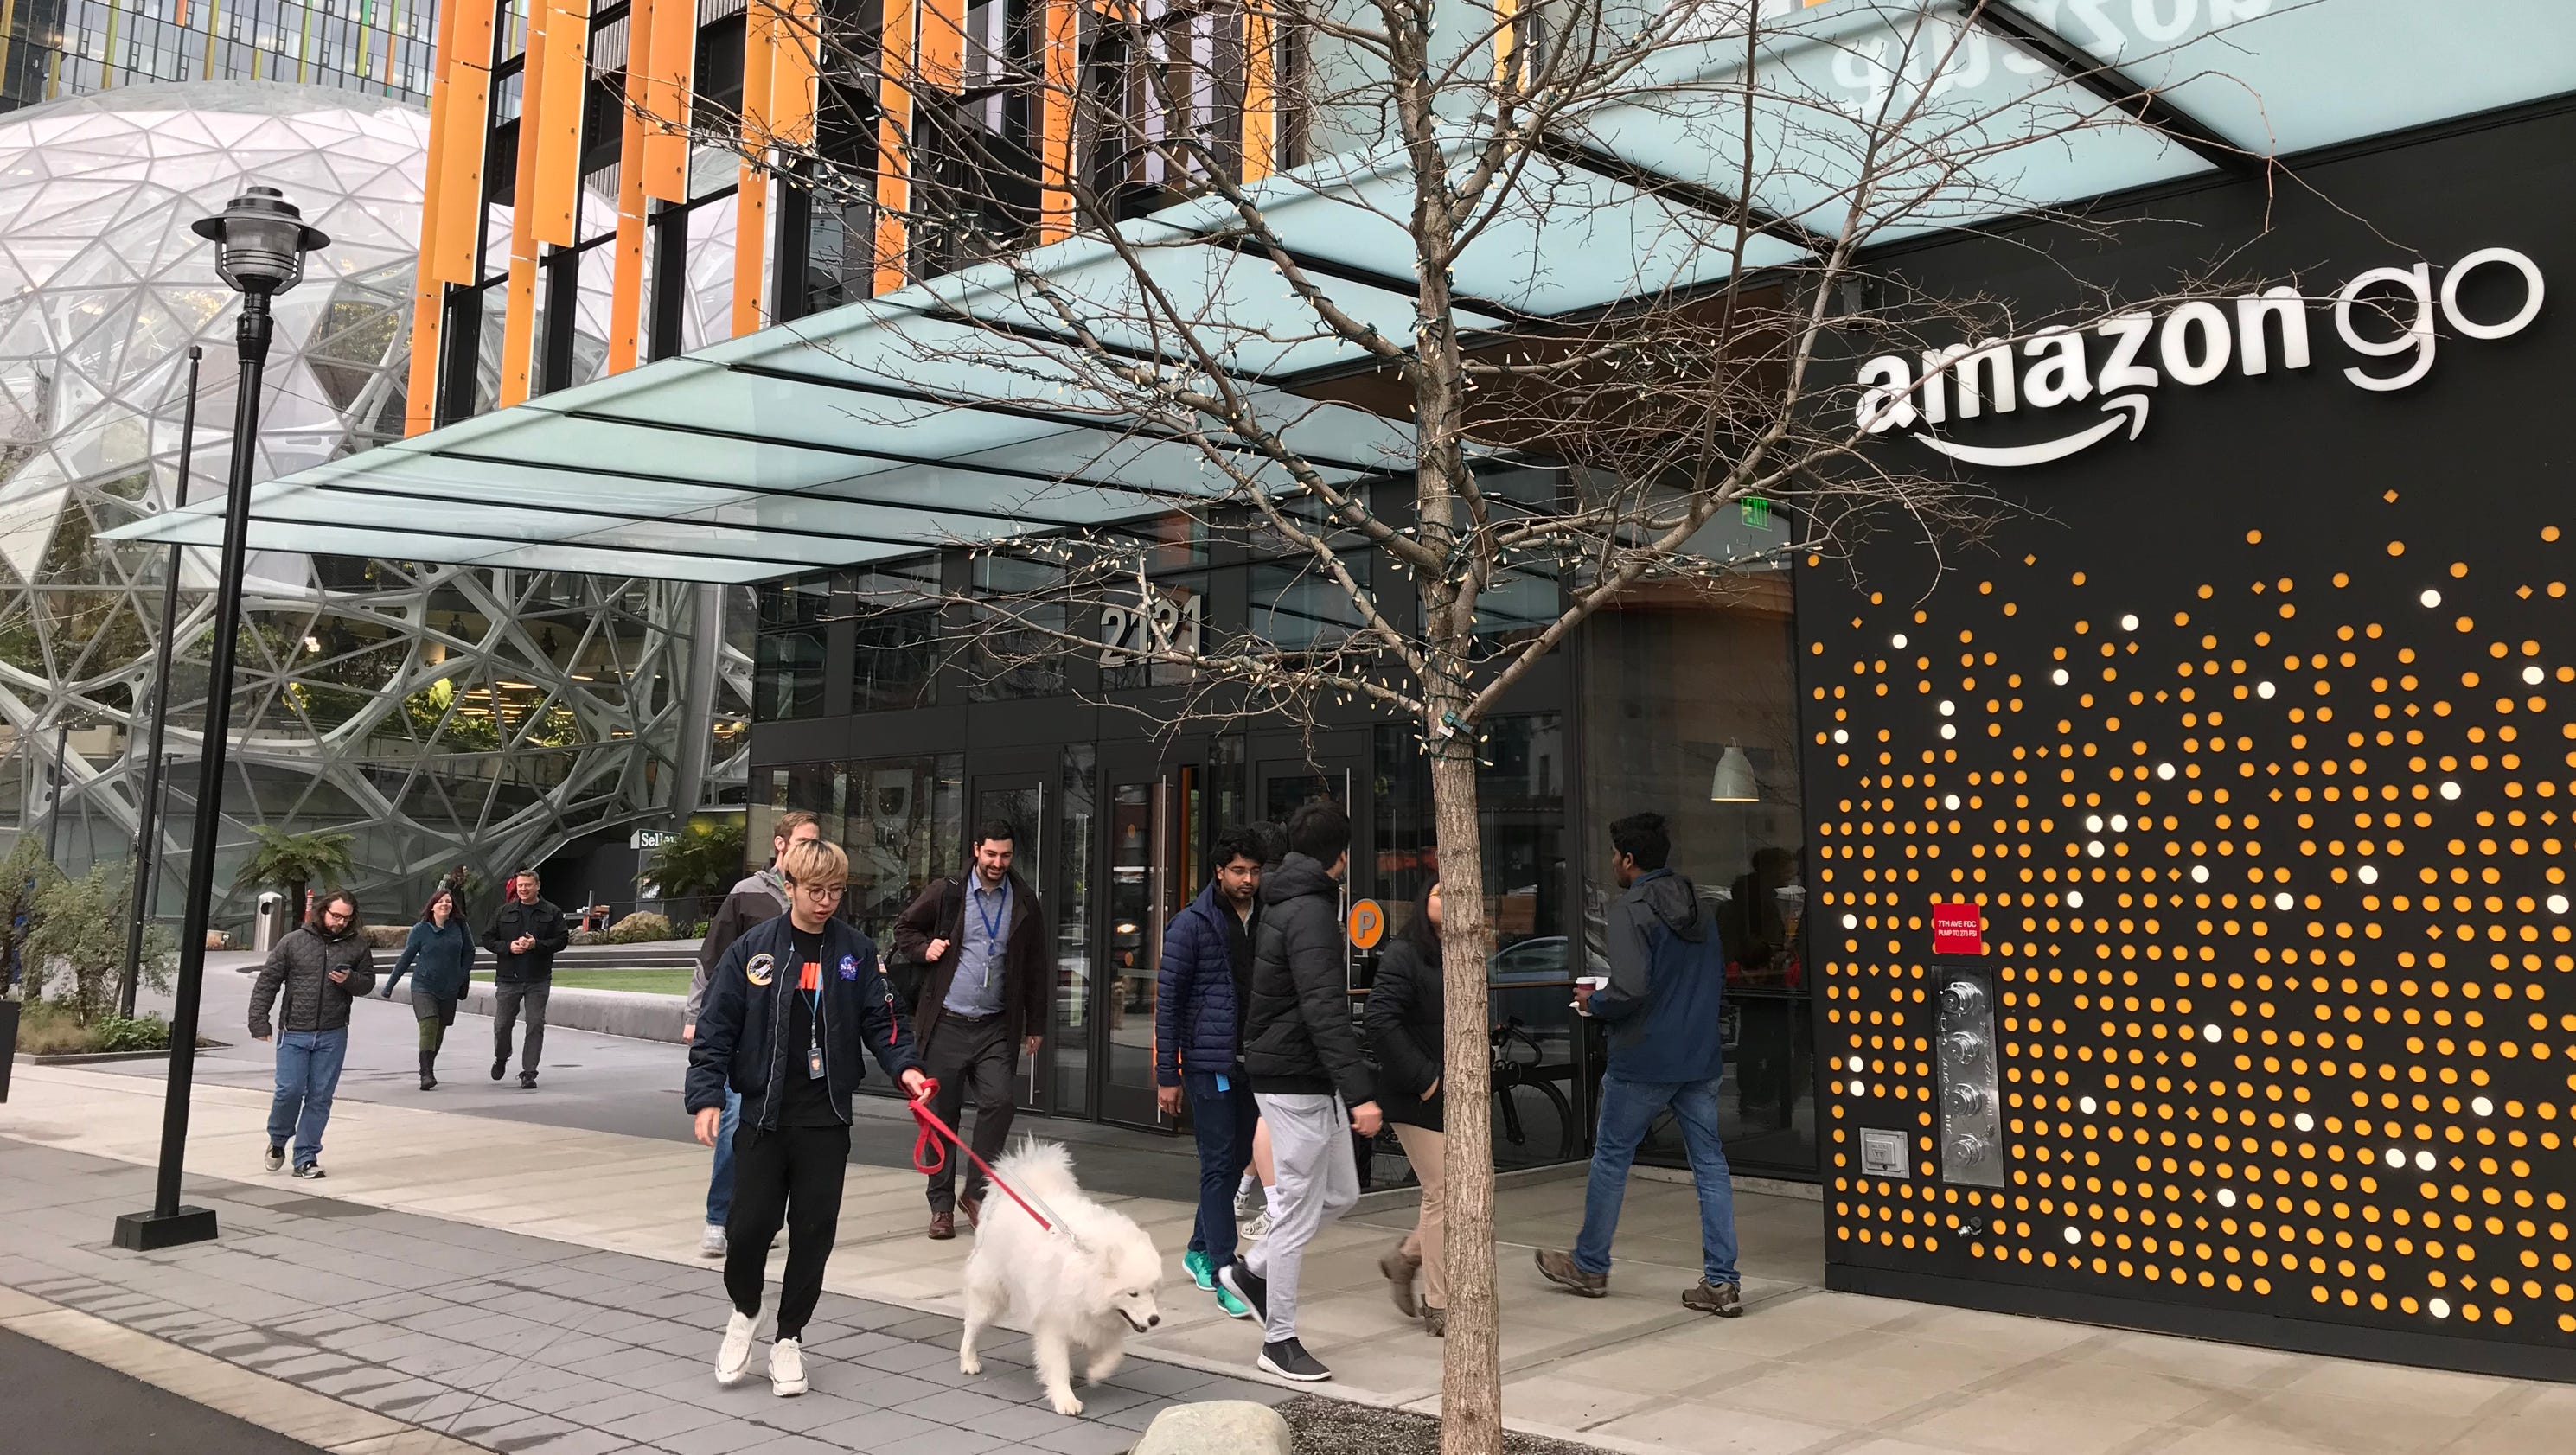 Amazon Go, a checkout-free grocery store, opens to the public3200 x 1680